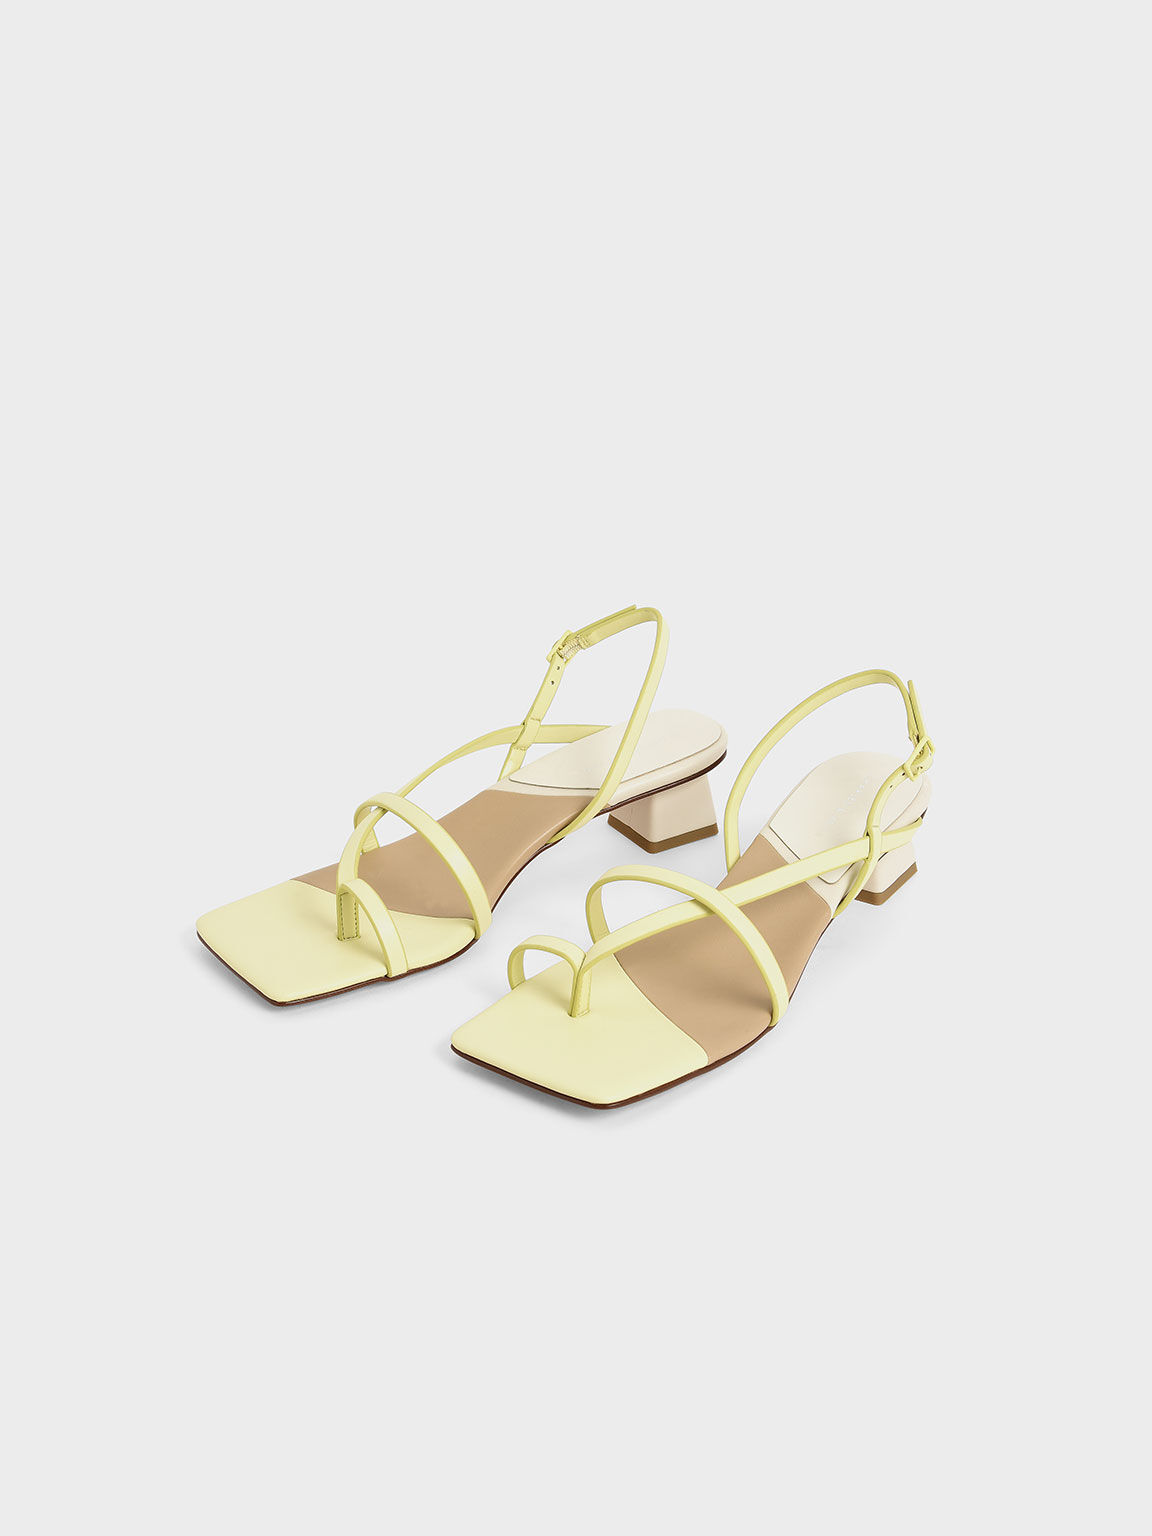 Sandal Strappy Slingback, Yellow, hi-res